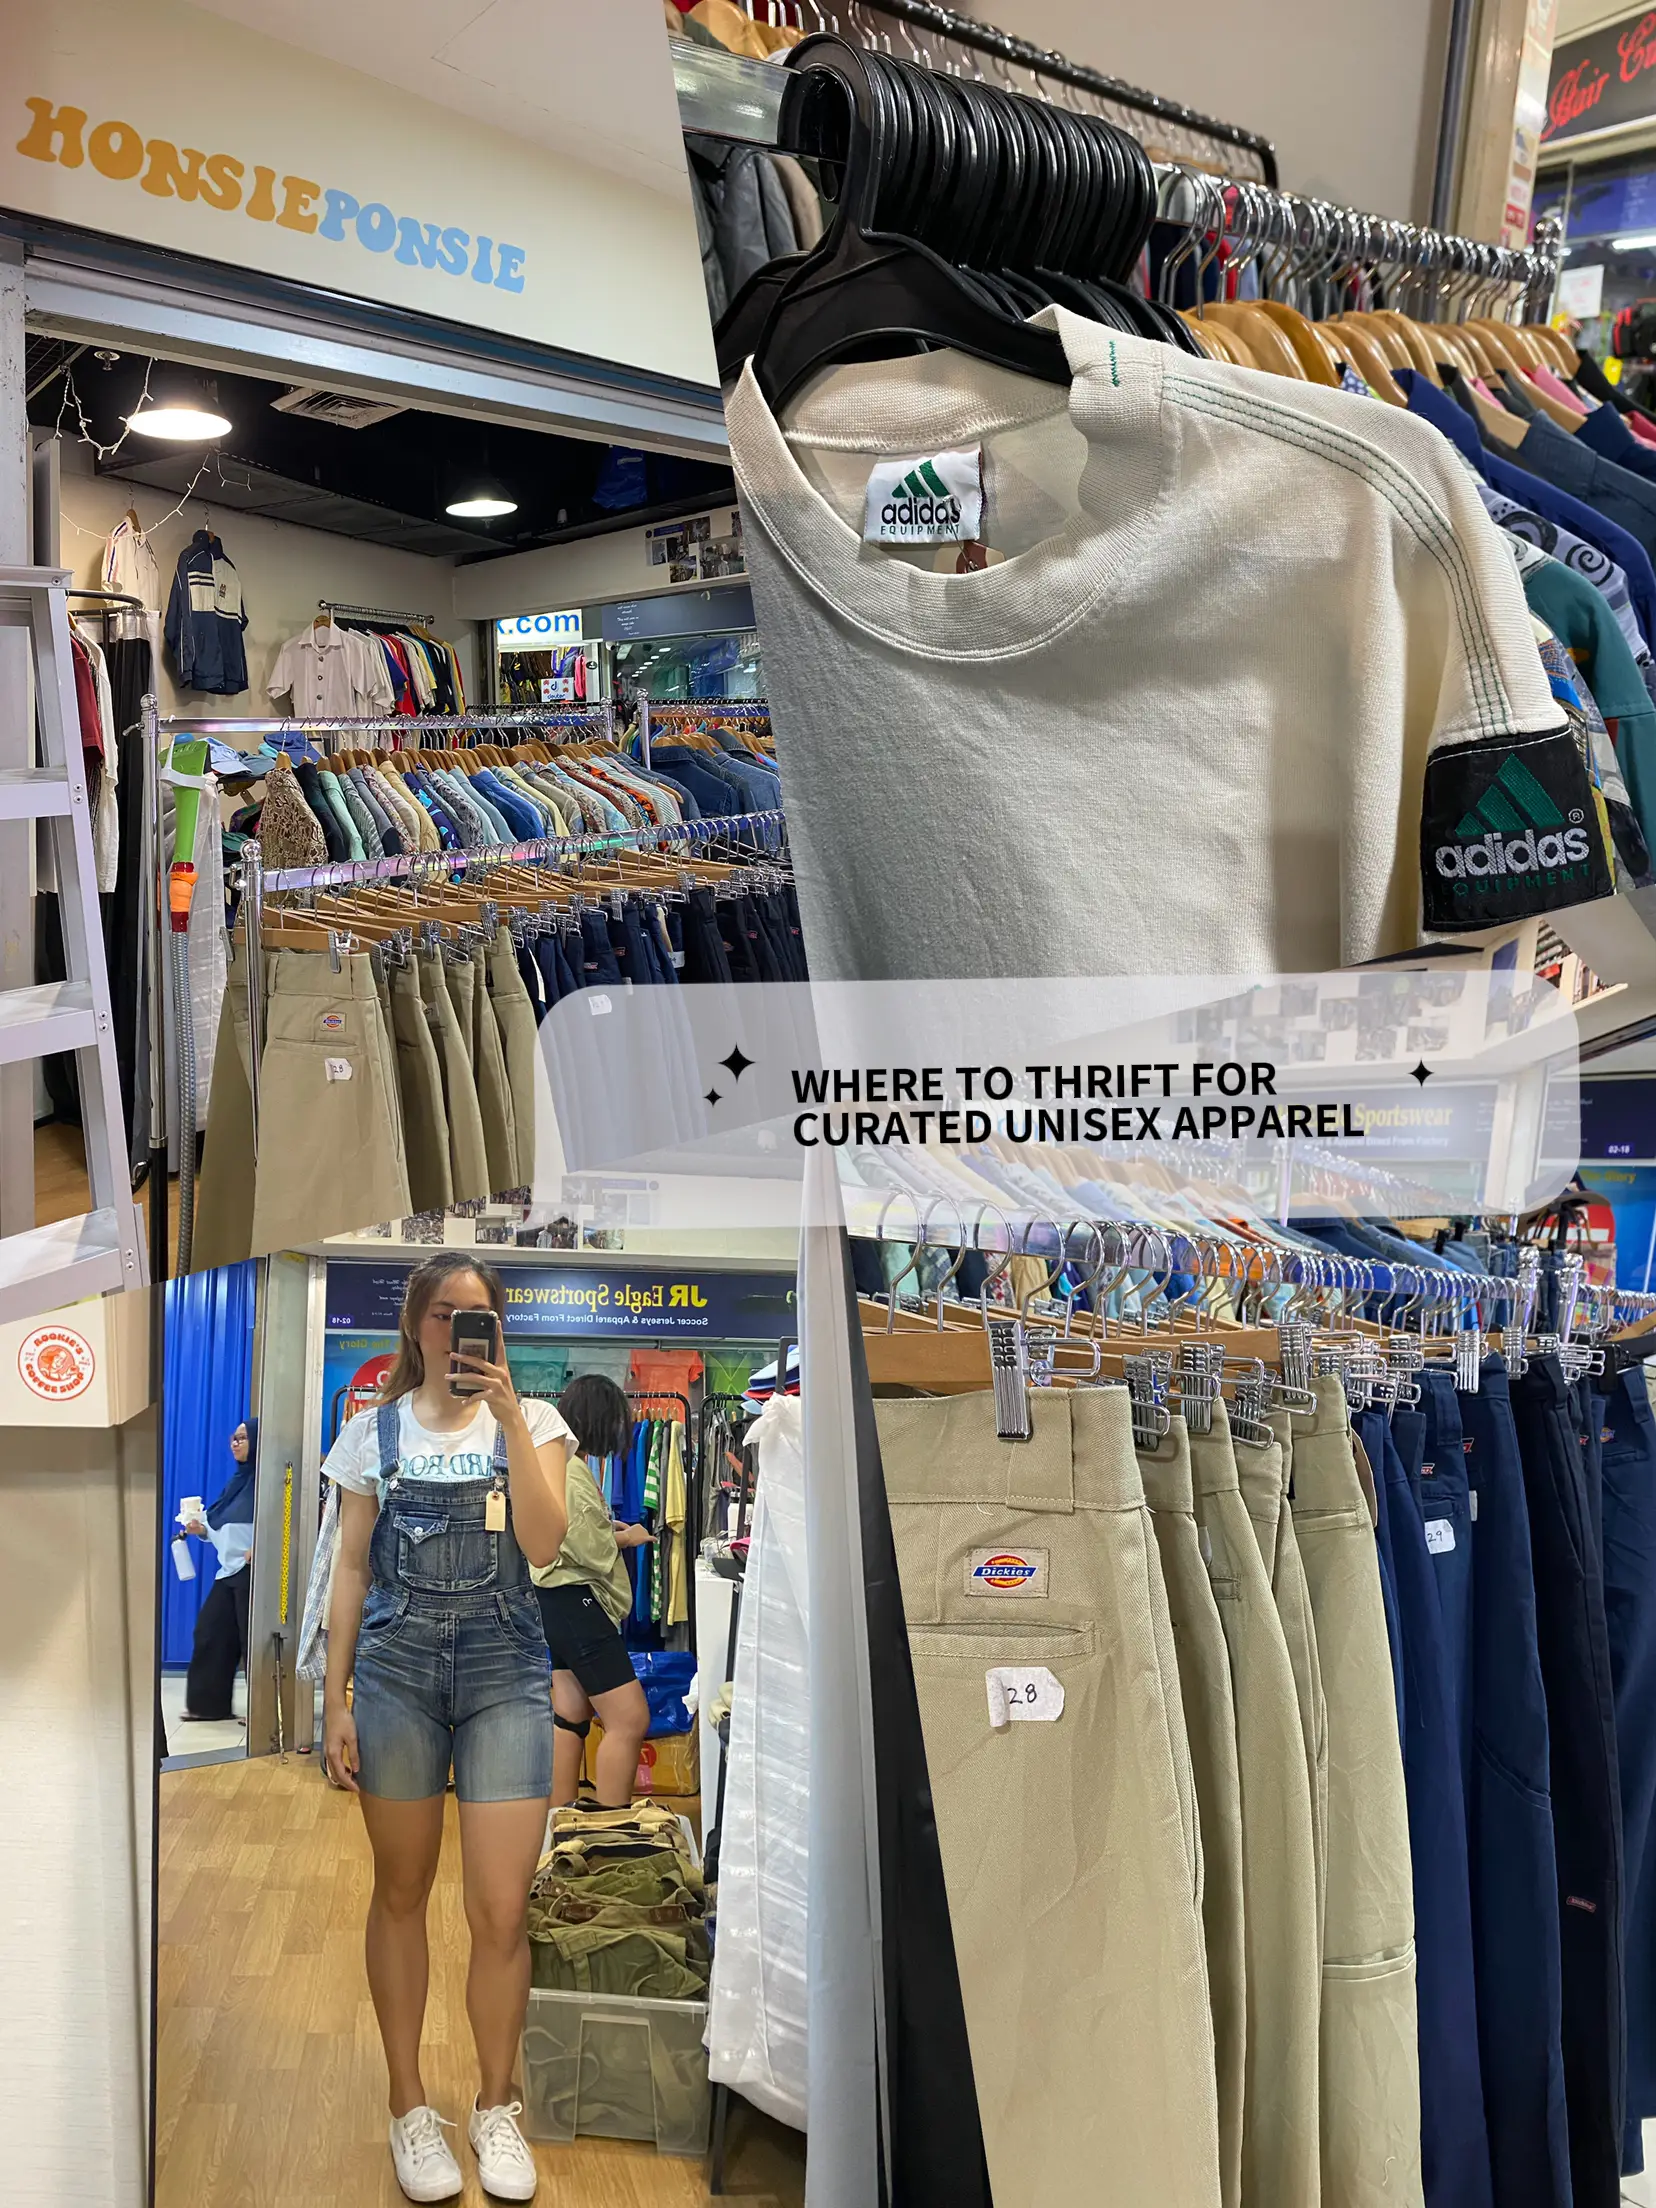 SG'S BEST THRIFT SHOP? curated unisex apparel, Gallery posted by Liang